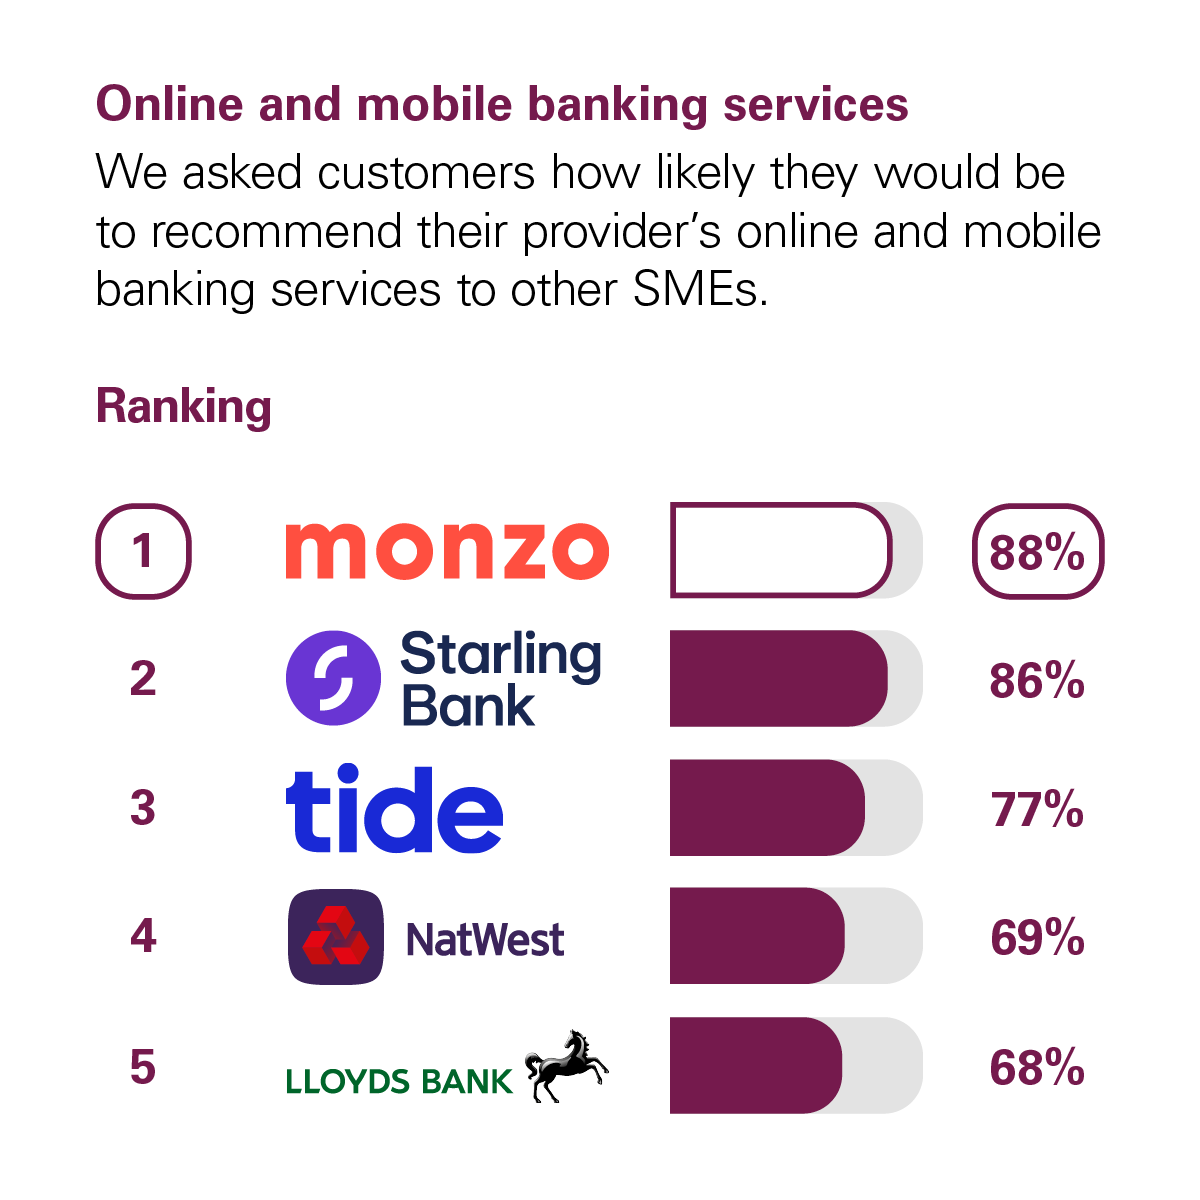 Graph showing the results of the CMA scoring of UK banks in the Online and Mobile Banking Services category. The CMA asked customers how likely they would be to recommend their provider's online and mobile banking services to other small and medium-sized enterprises (SMEs*). The rankings with percentage scores are: 1st Monzo with 88%. 2nd Starling Bank with 86%. 3rd Tide with 77%. 4th NatWest with 69%. 5th Lloyds Bank with 68%.